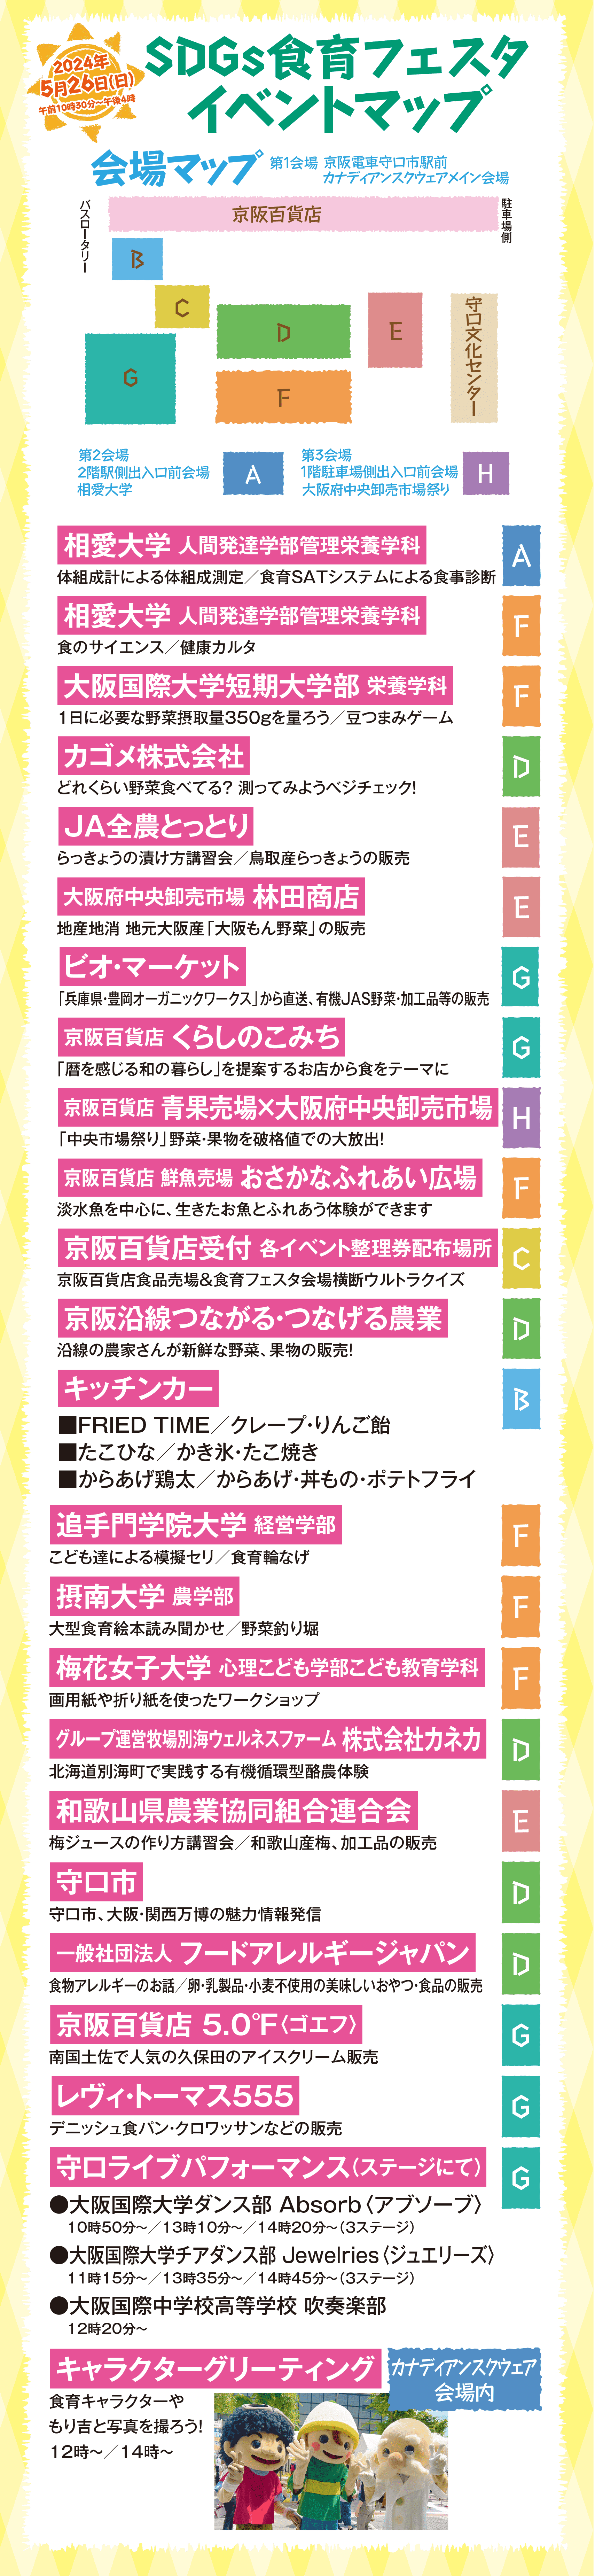 20240526SDGs食育フェスタHP_text-2.png